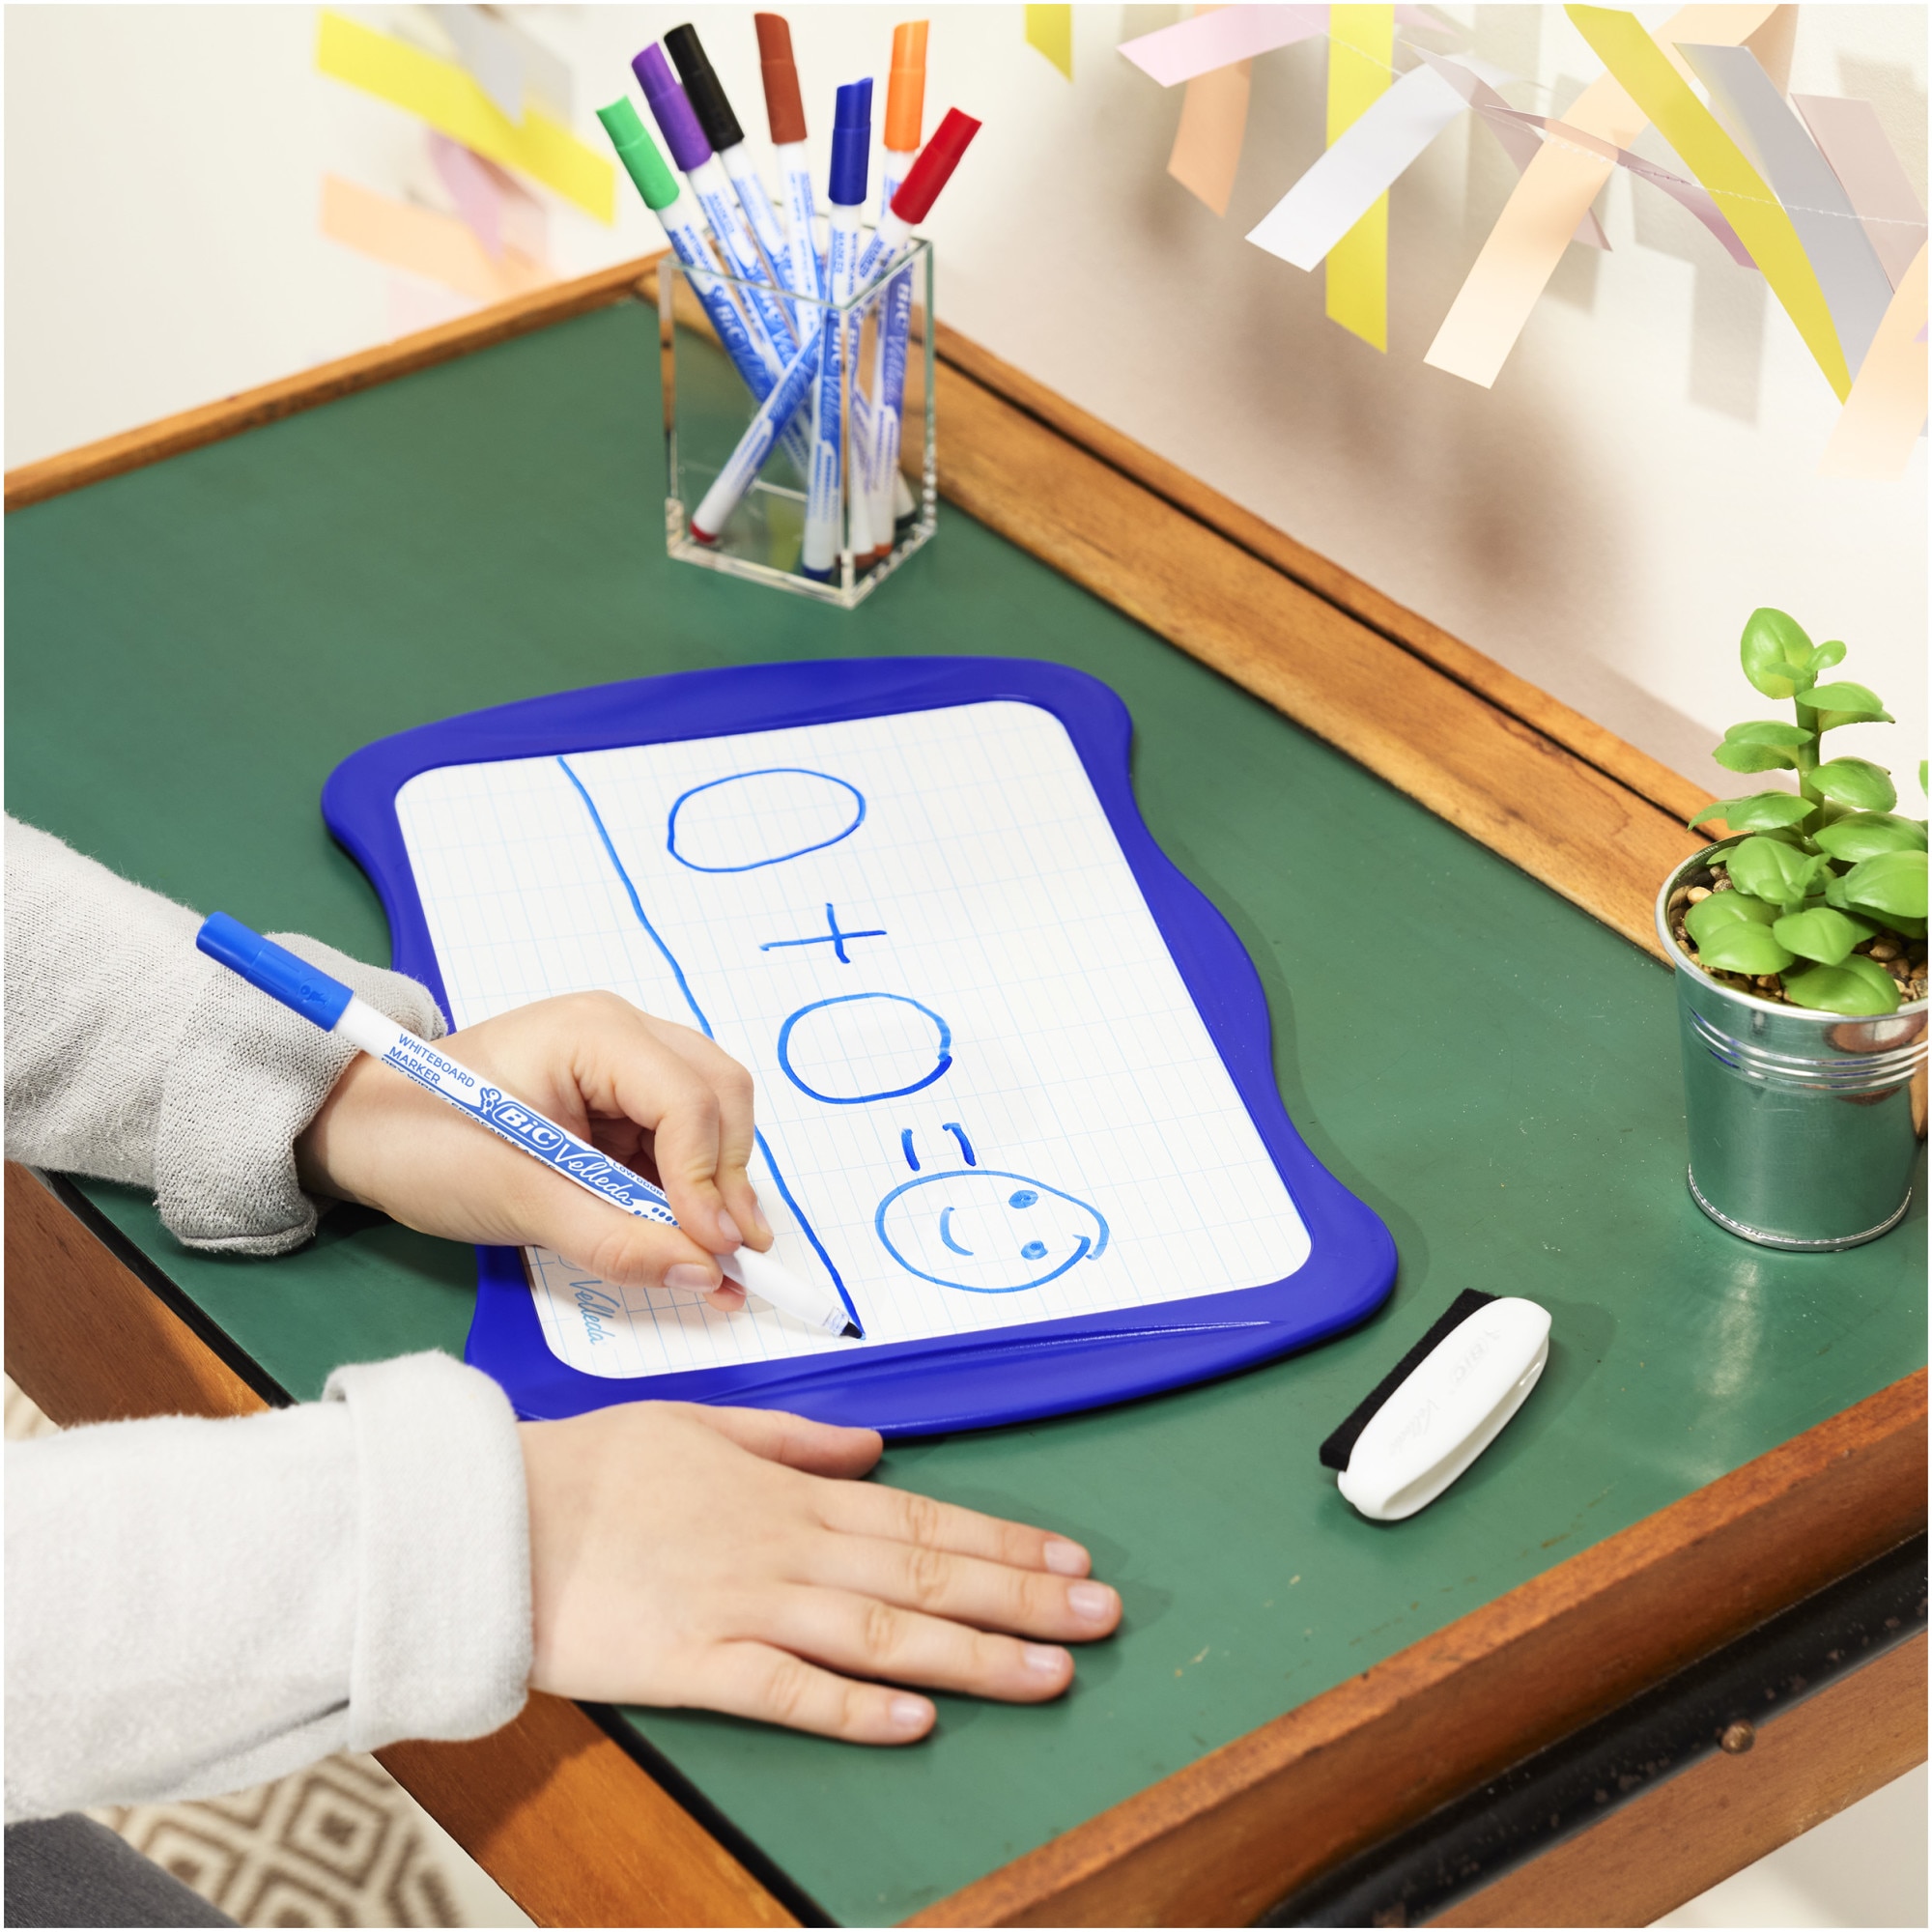 BIC Velleda Double-Sided Dry Erase Board (21 x 31 cm) with 8 Whiteboard  Markers and Eraser - Blue Frame, Pack of 1 BIC